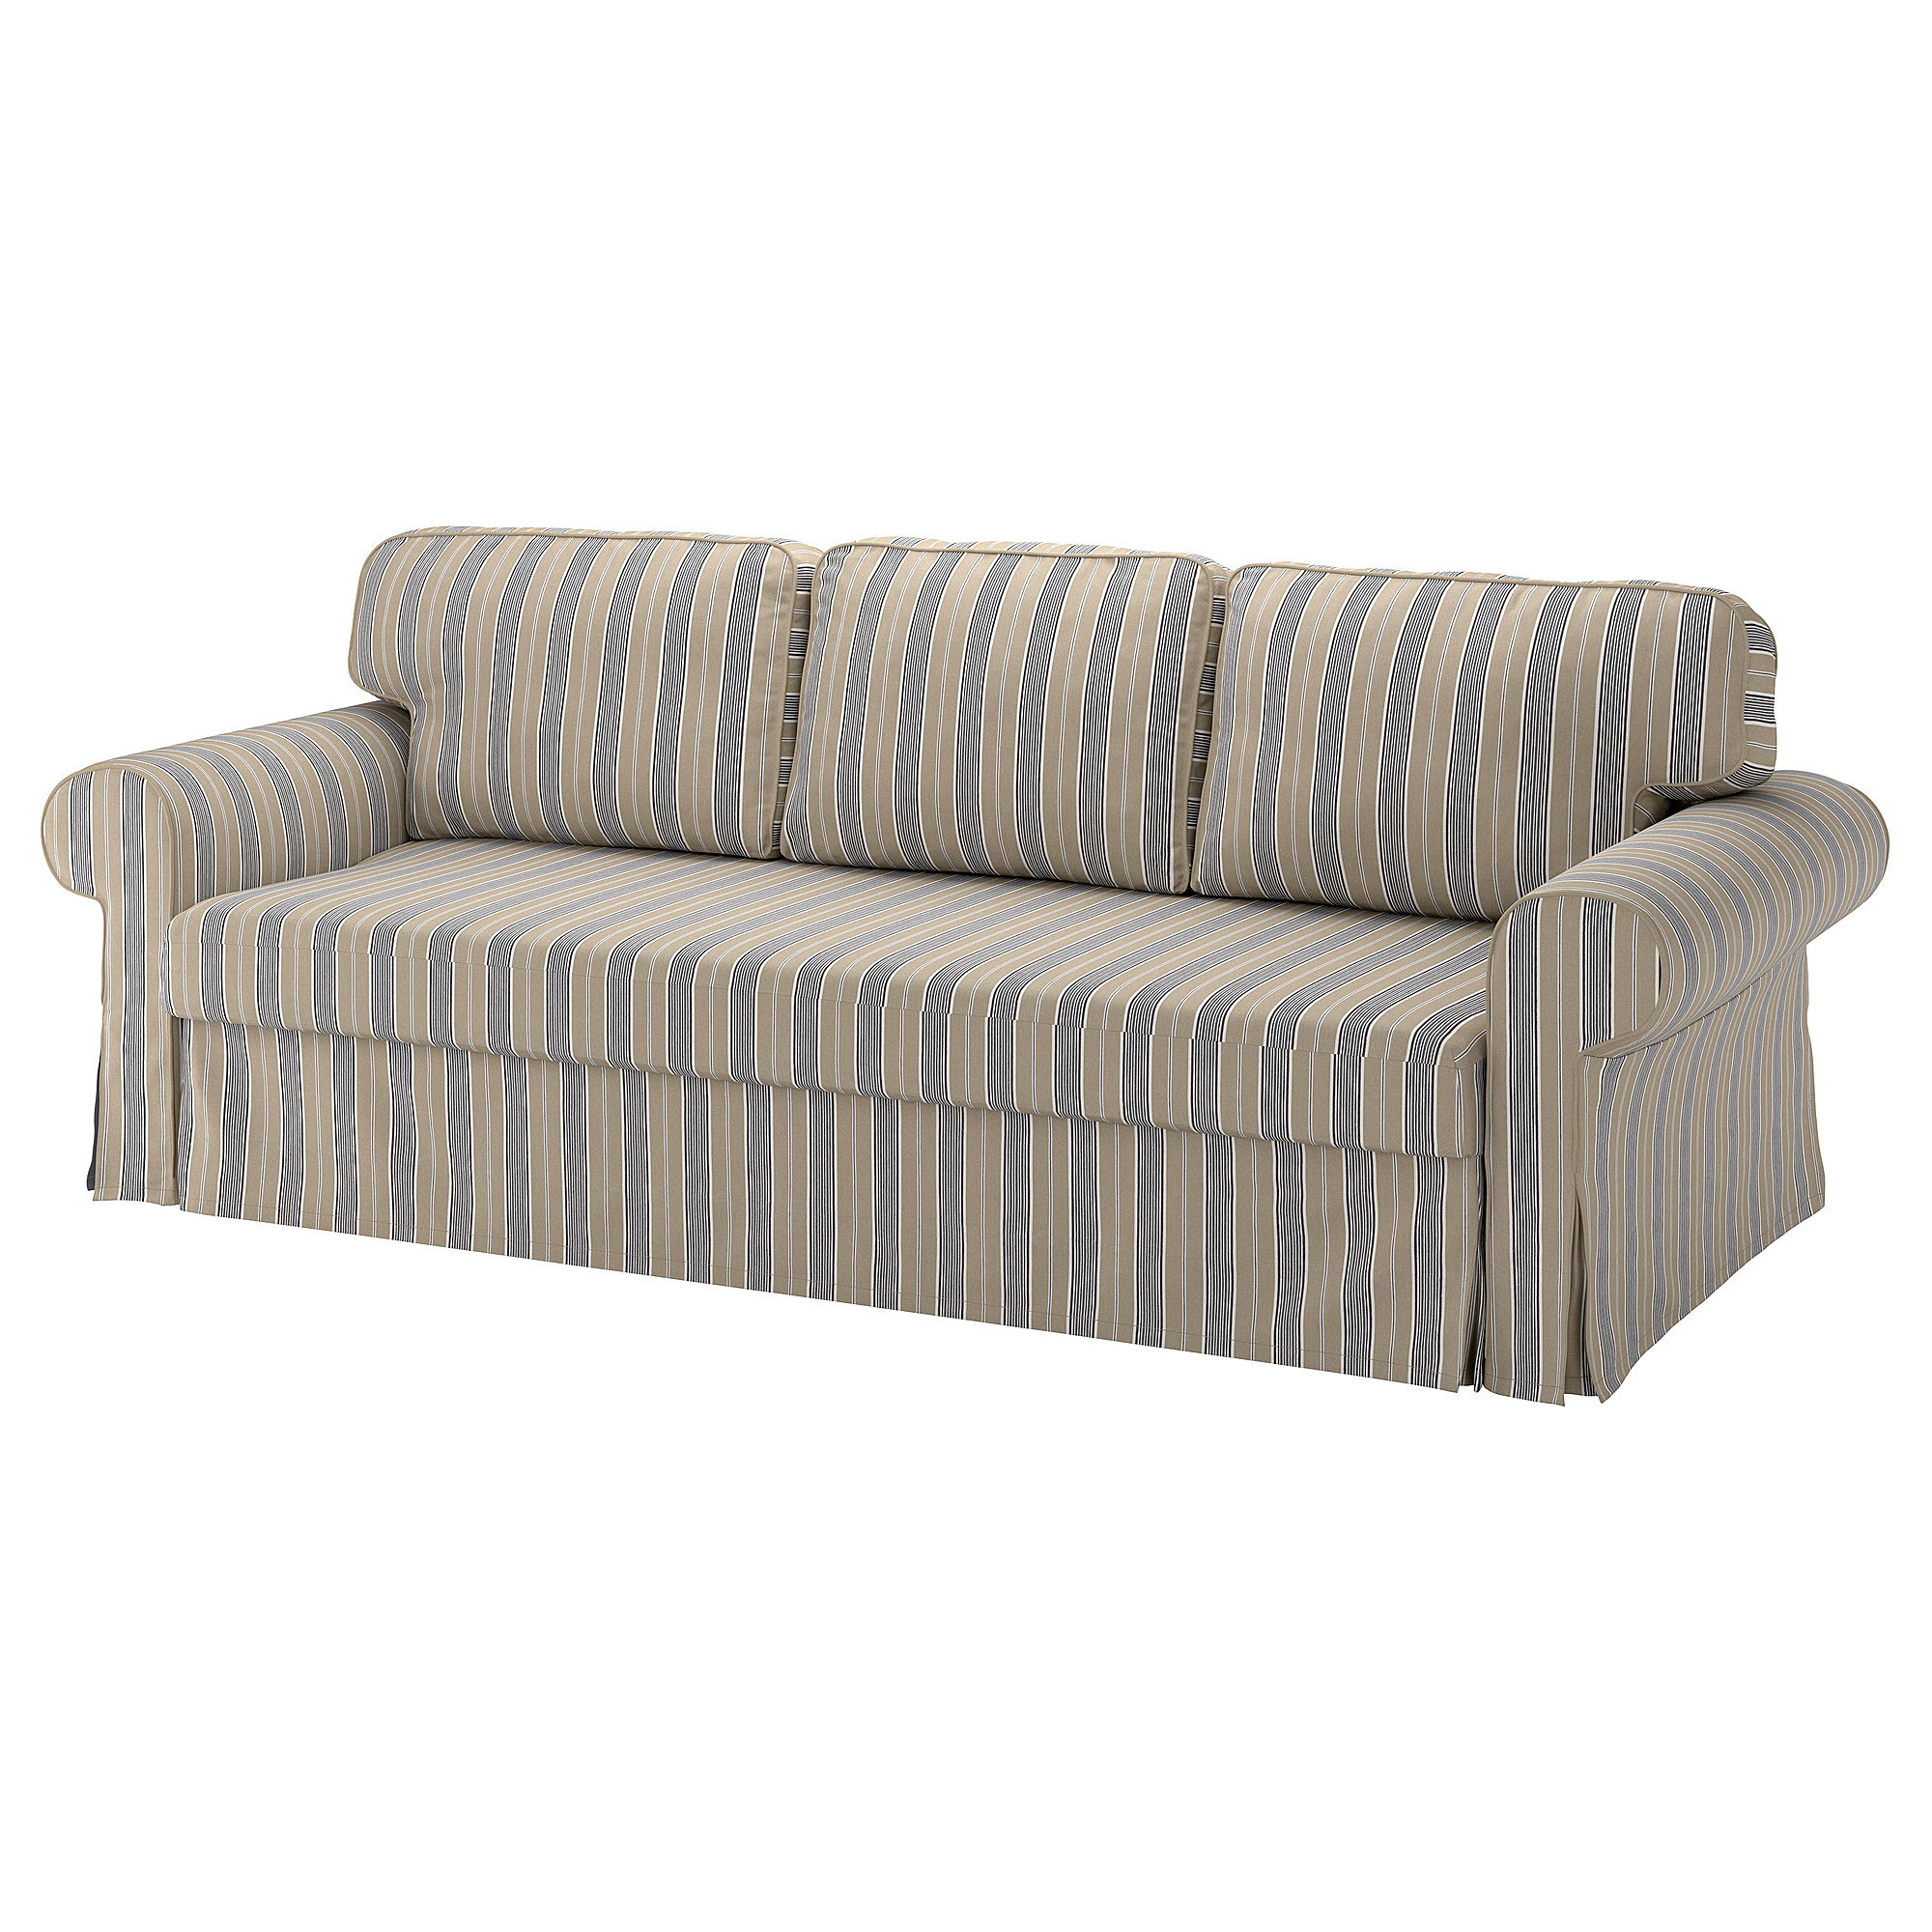 VRETSTORP cover for 3-seat sofa-bed